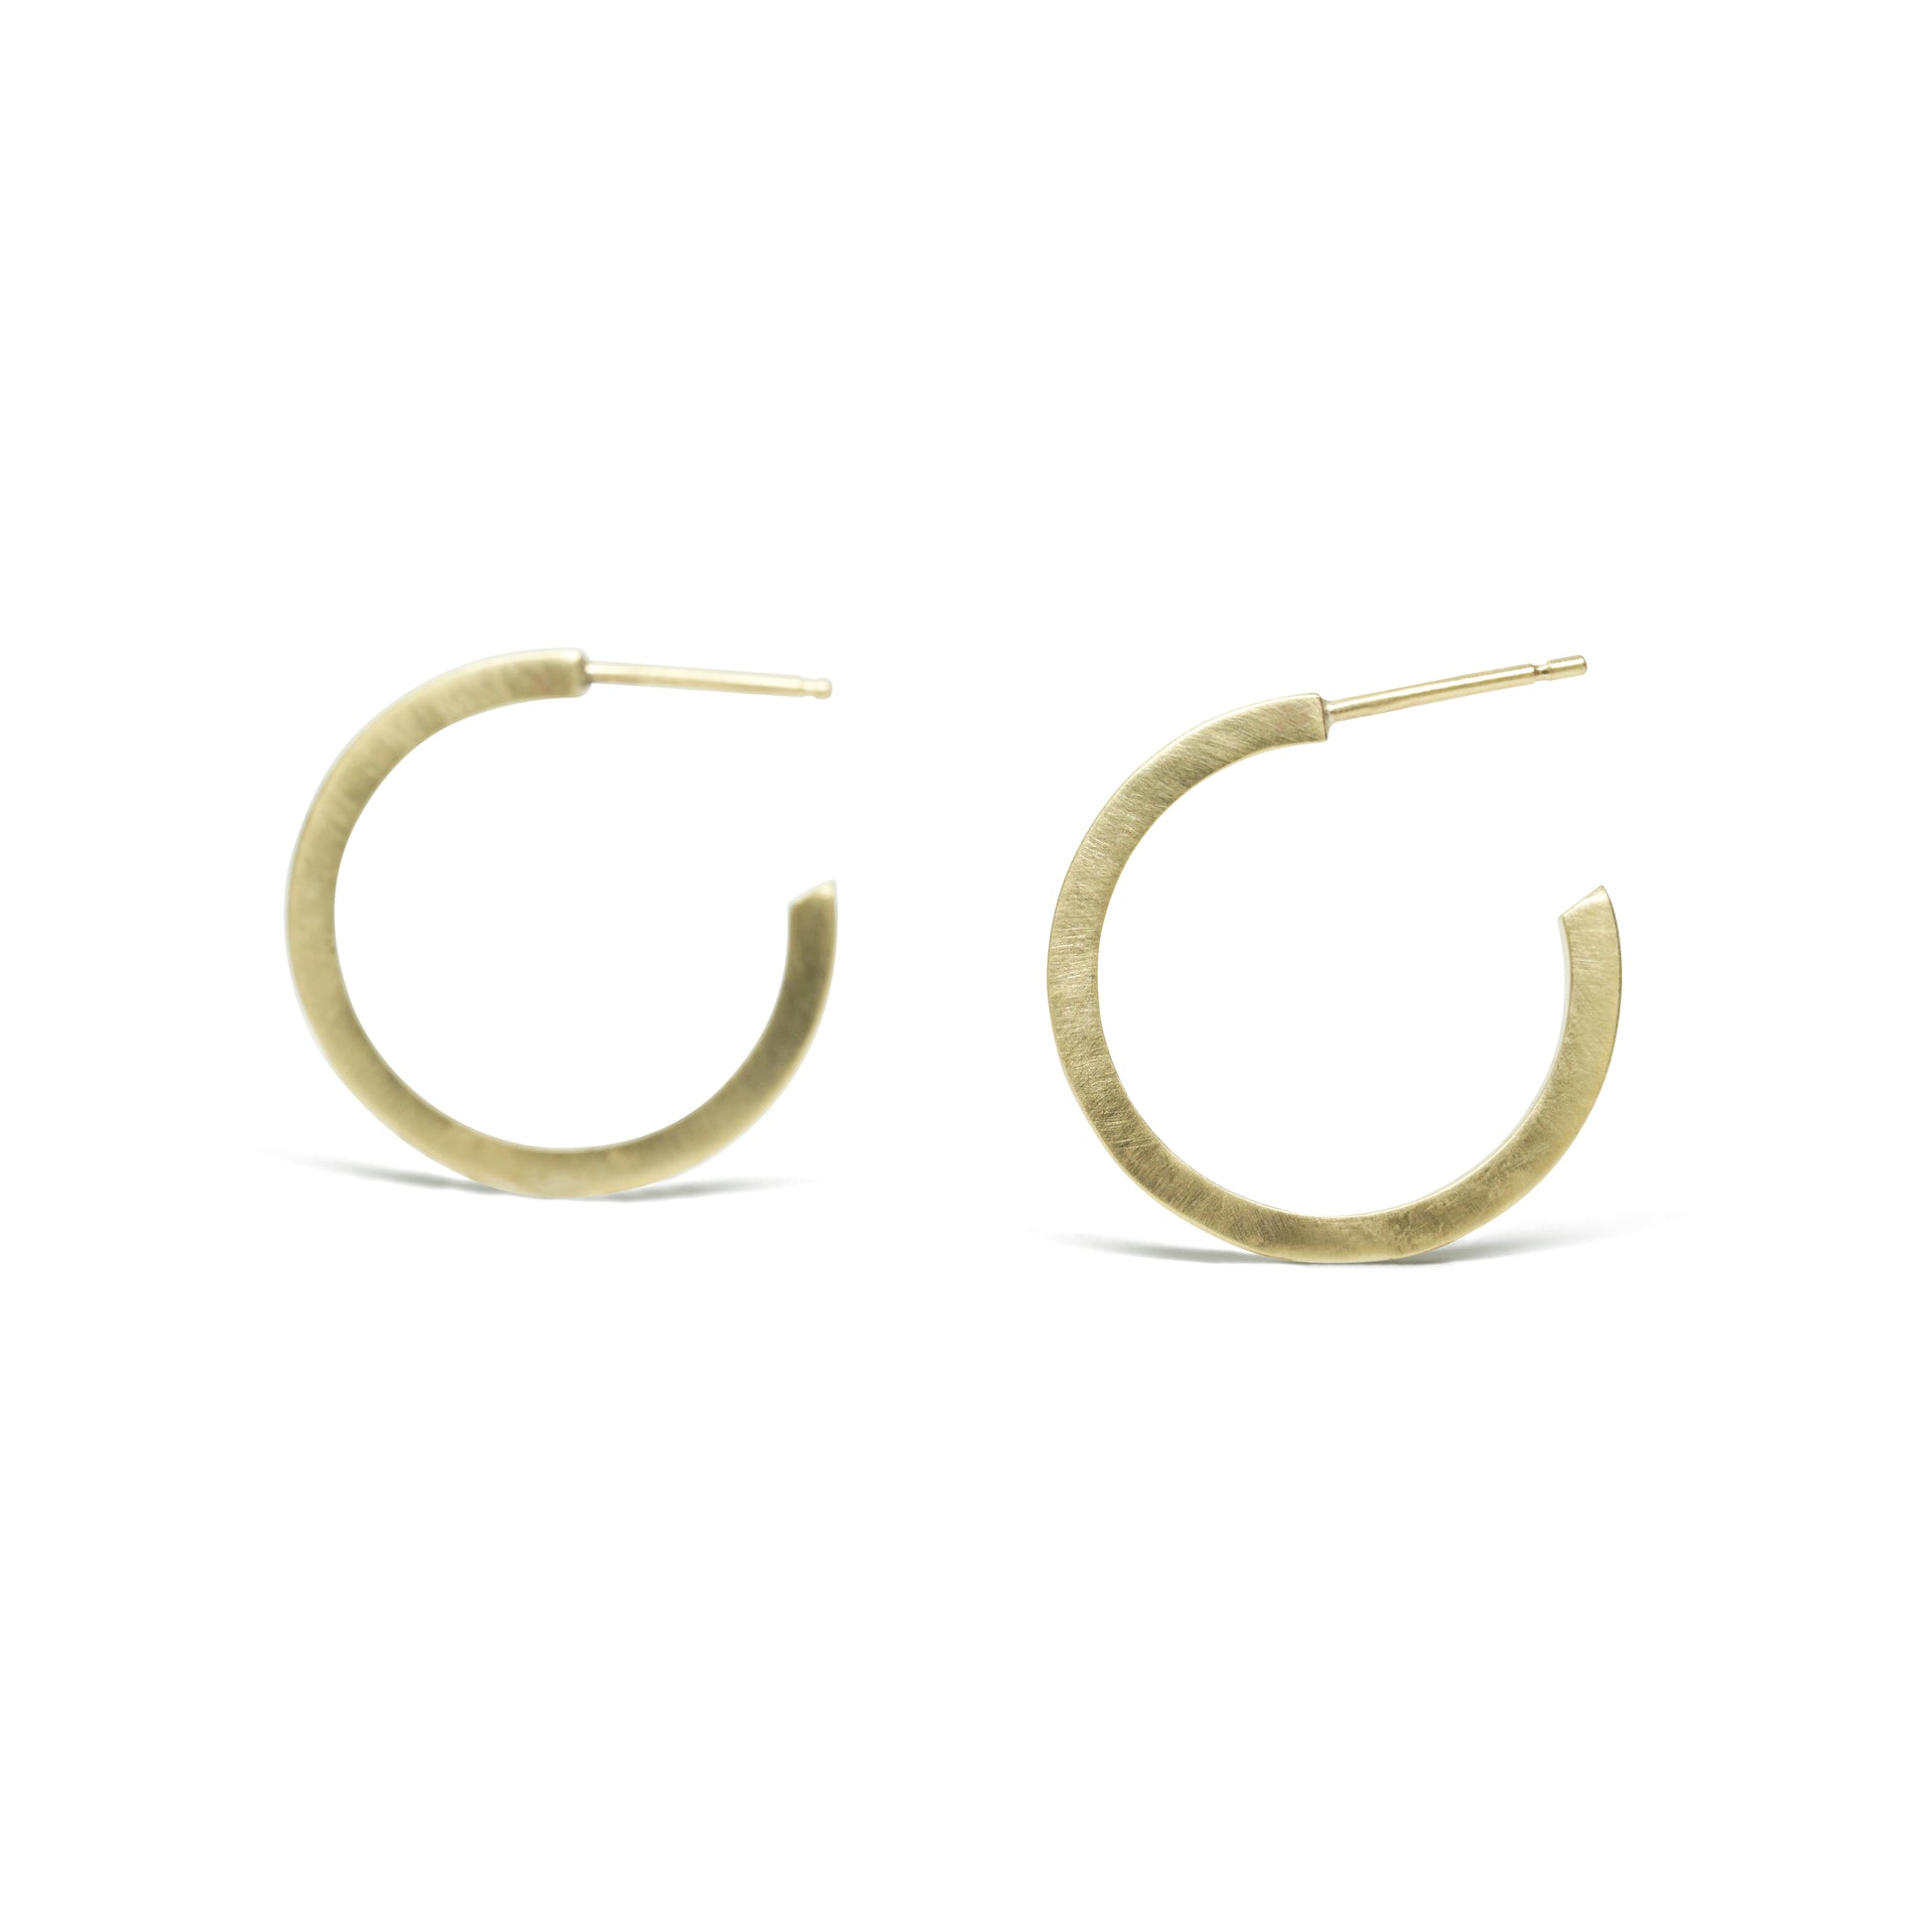 Discover the SQUARE / HOOPS, a unique blend of a square design and a classic hoop style. With its modern and trendy look, these earrings are the perfect accessory to add a touch of sophistication to any outfit. 14k Yellow Gold Satin Finish Dimensions (HxW): 20.15mm x 1.39mm